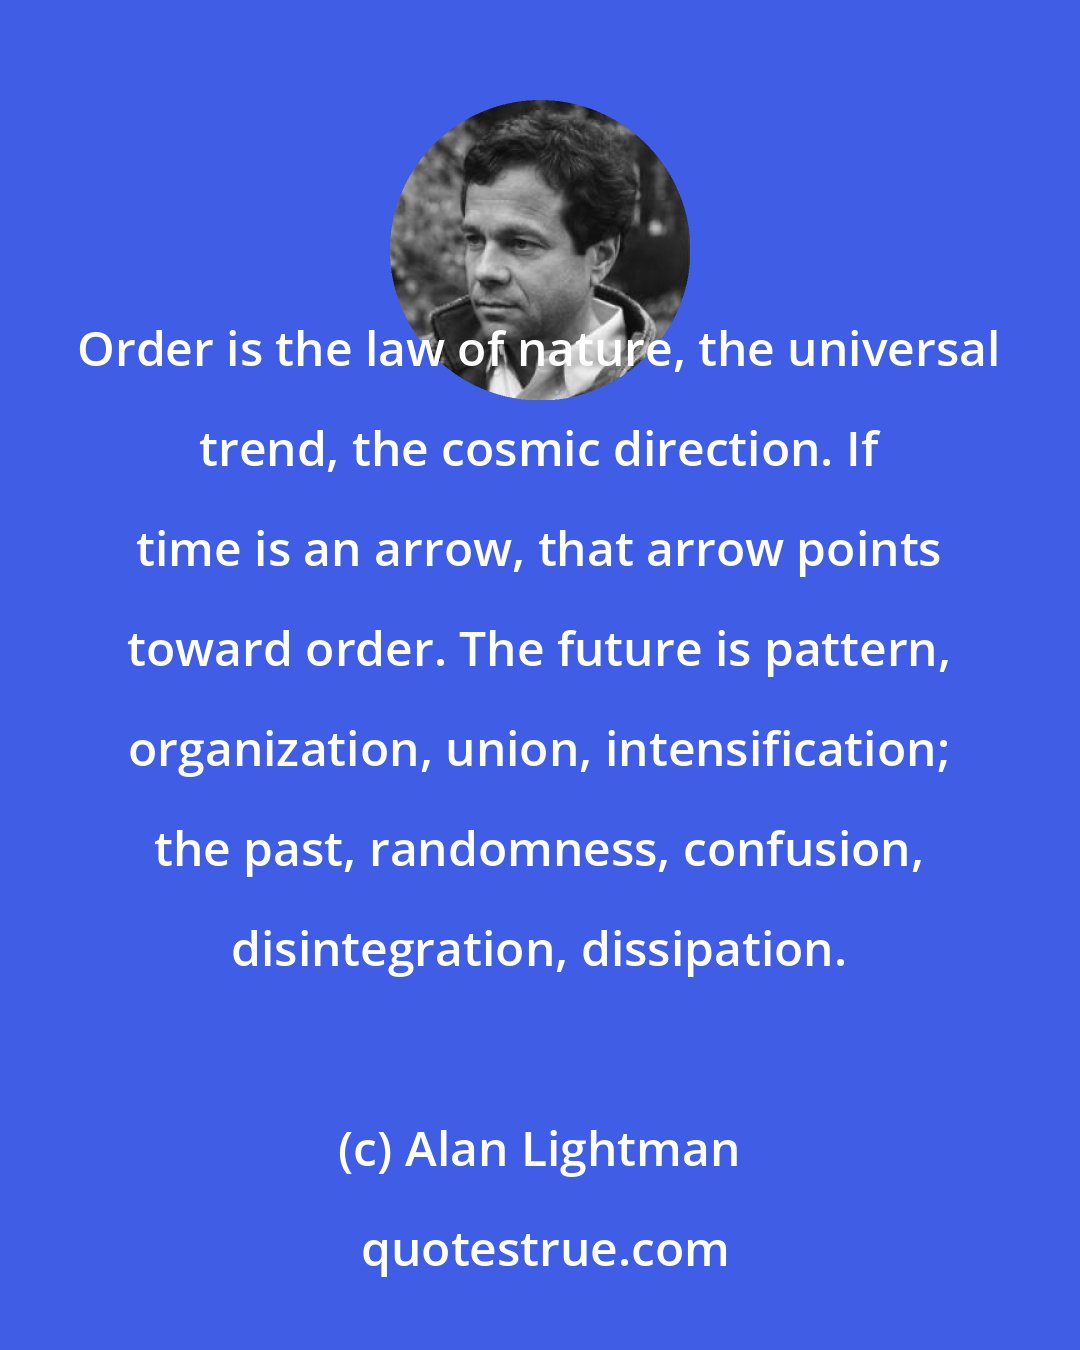 Alan Lightman: Order is the law of nature, the universal trend, the cosmic direction. If time is an arrow, that arrow points toward order. The future is pattern, organization, union, intensification; the past, randomness, confusion, disintegration, dissipation.